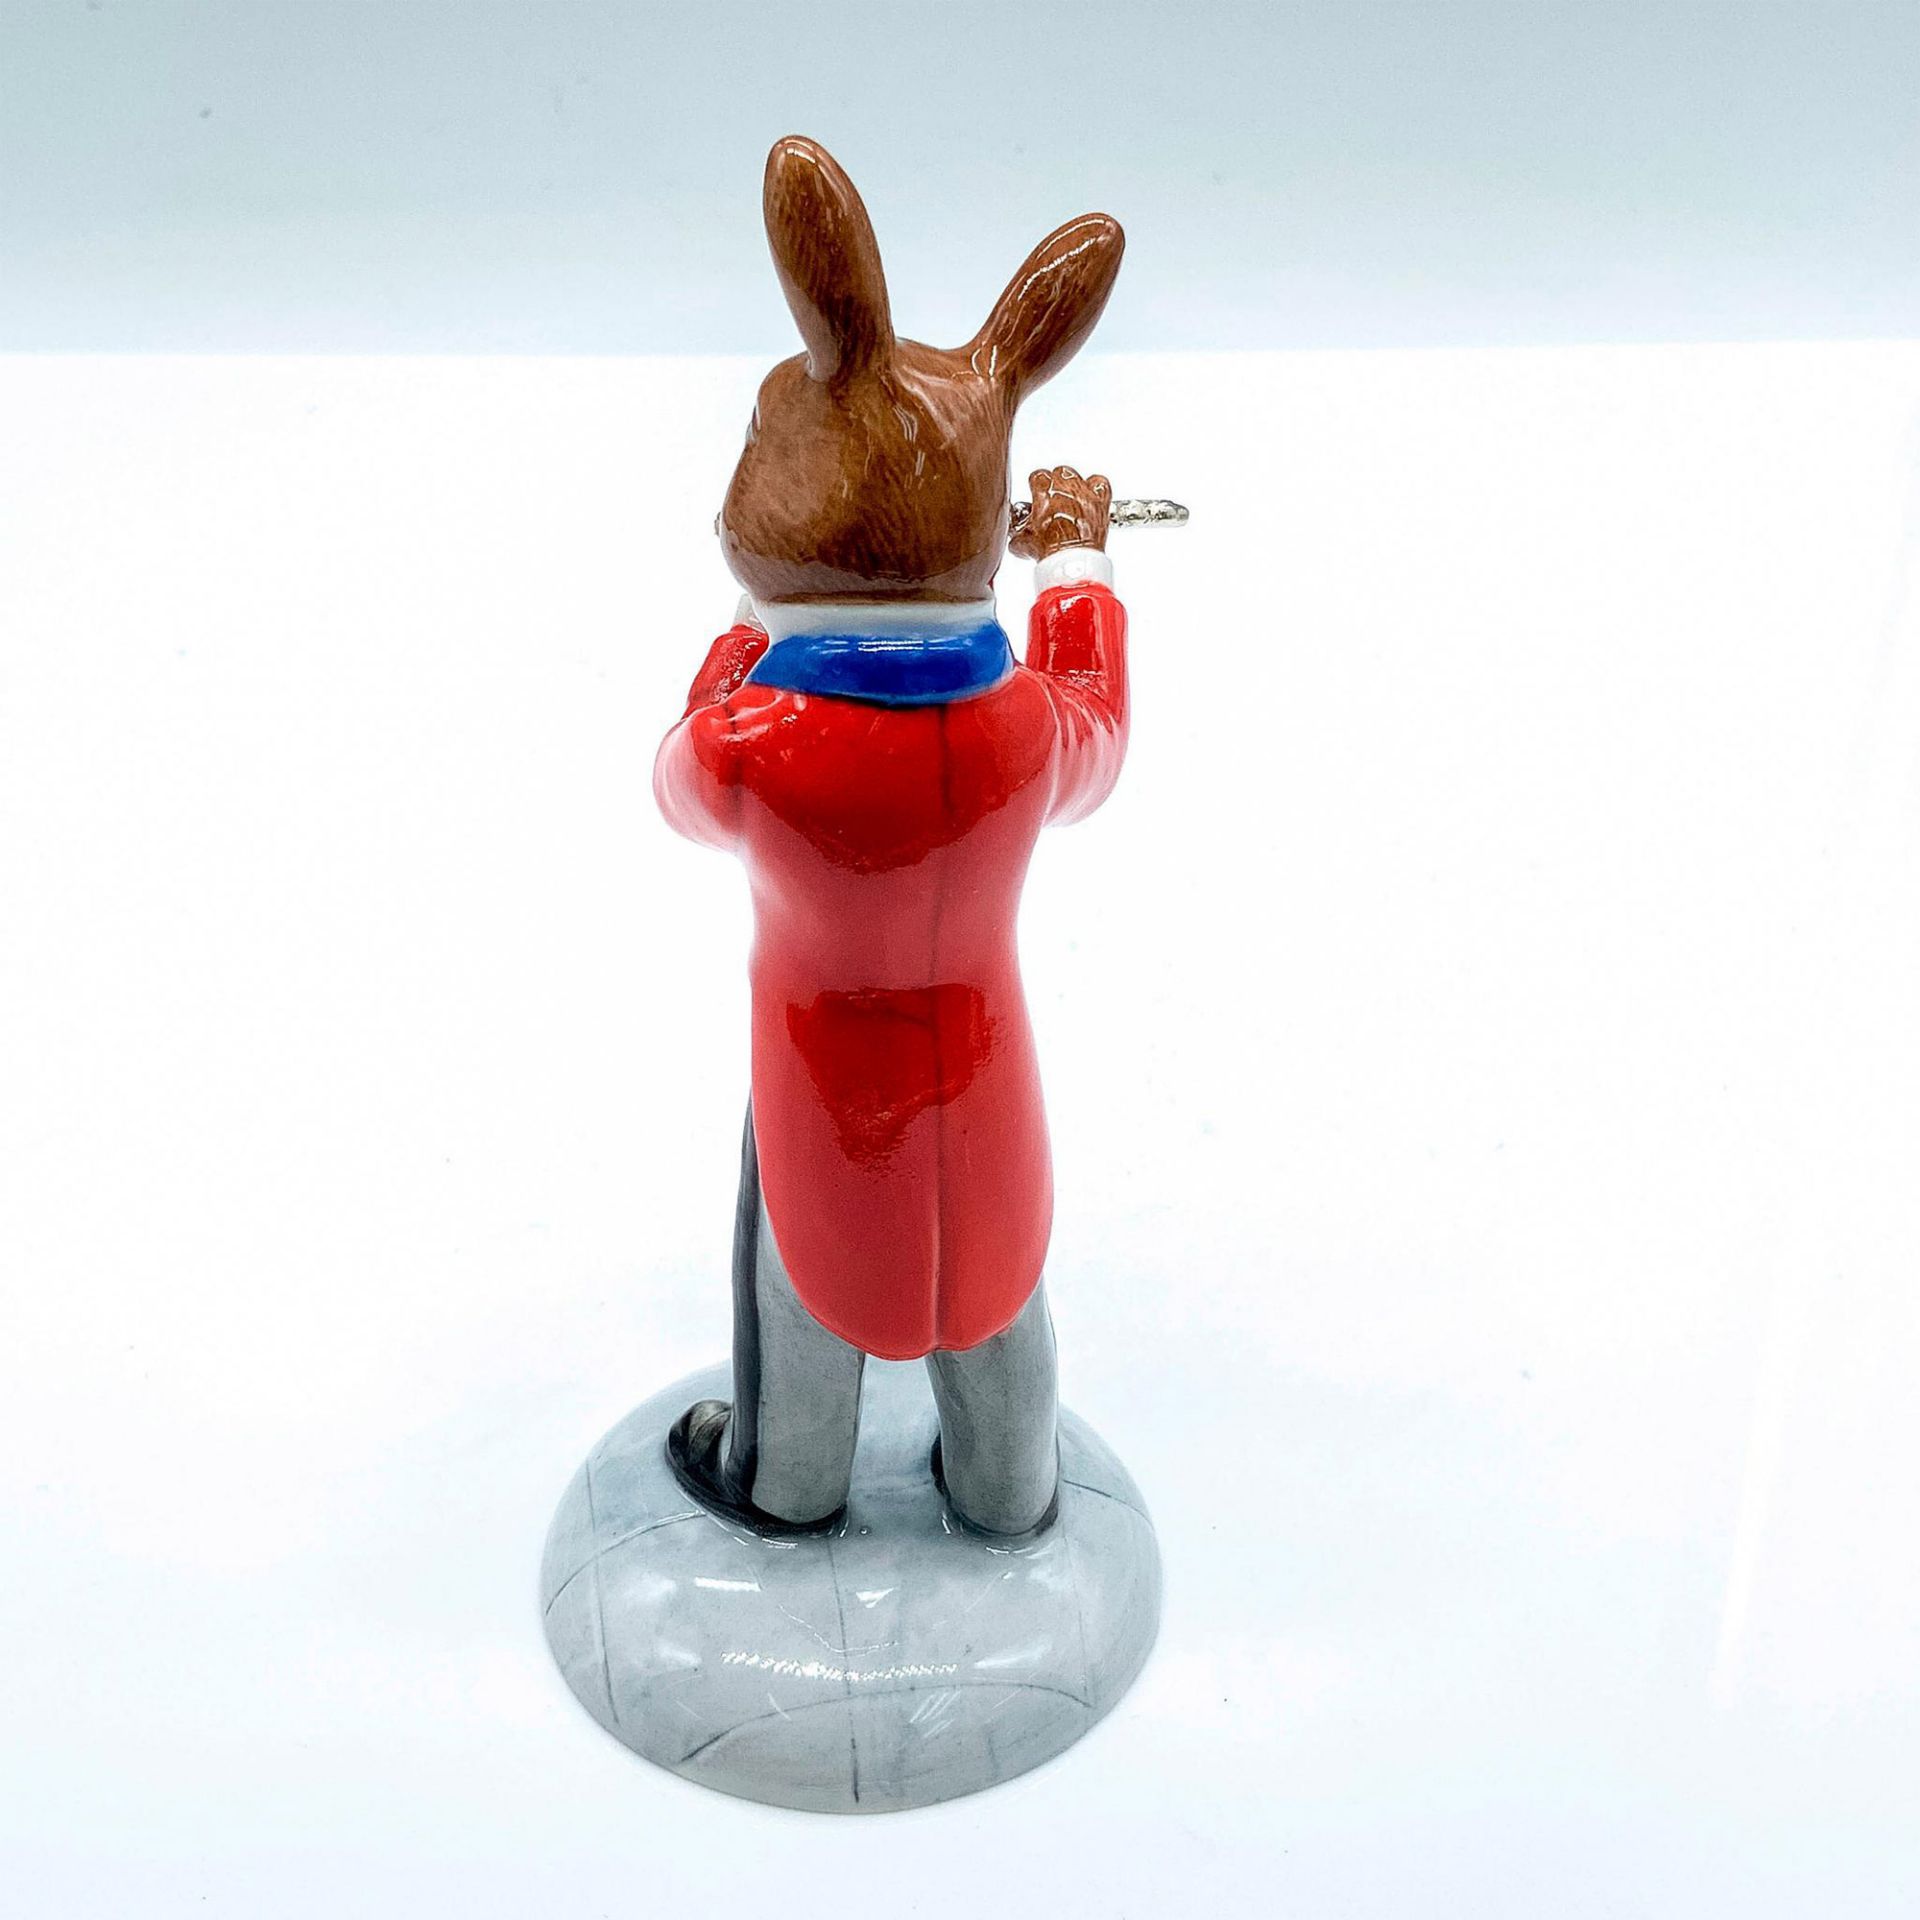 Royal Doulton Bunnykins LE Figurine, The Flute Player DB391 - Image 2 of 4